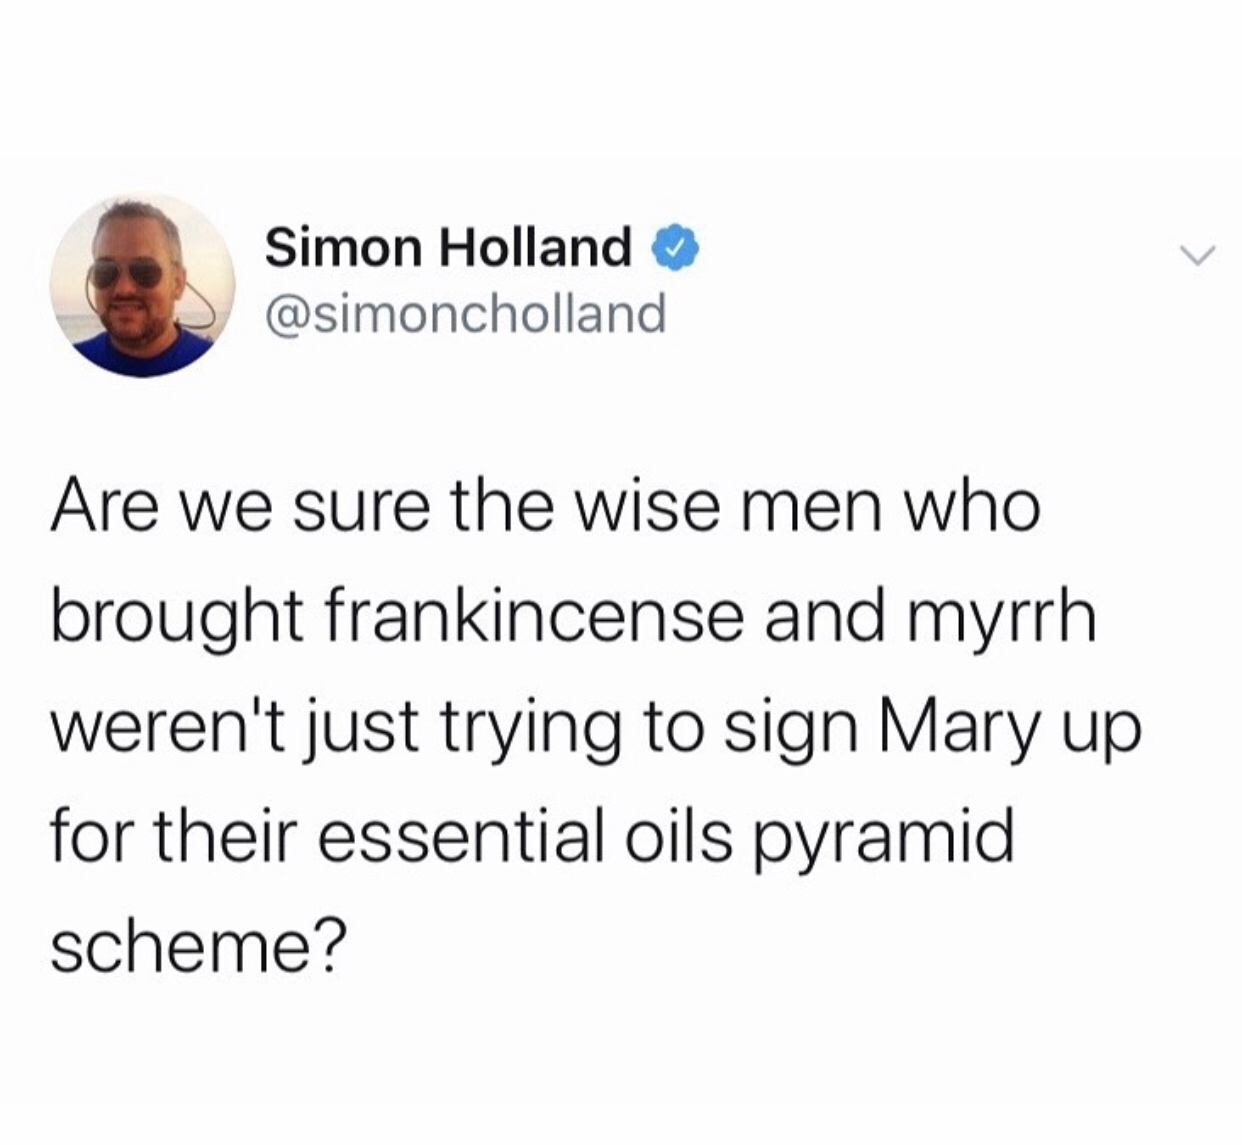 paint wings meme - Simon Holland Are we sure the wise men who brought frankincense and myrrh weren't just trying to sign Mary up for their essential oils pyramid scheme?